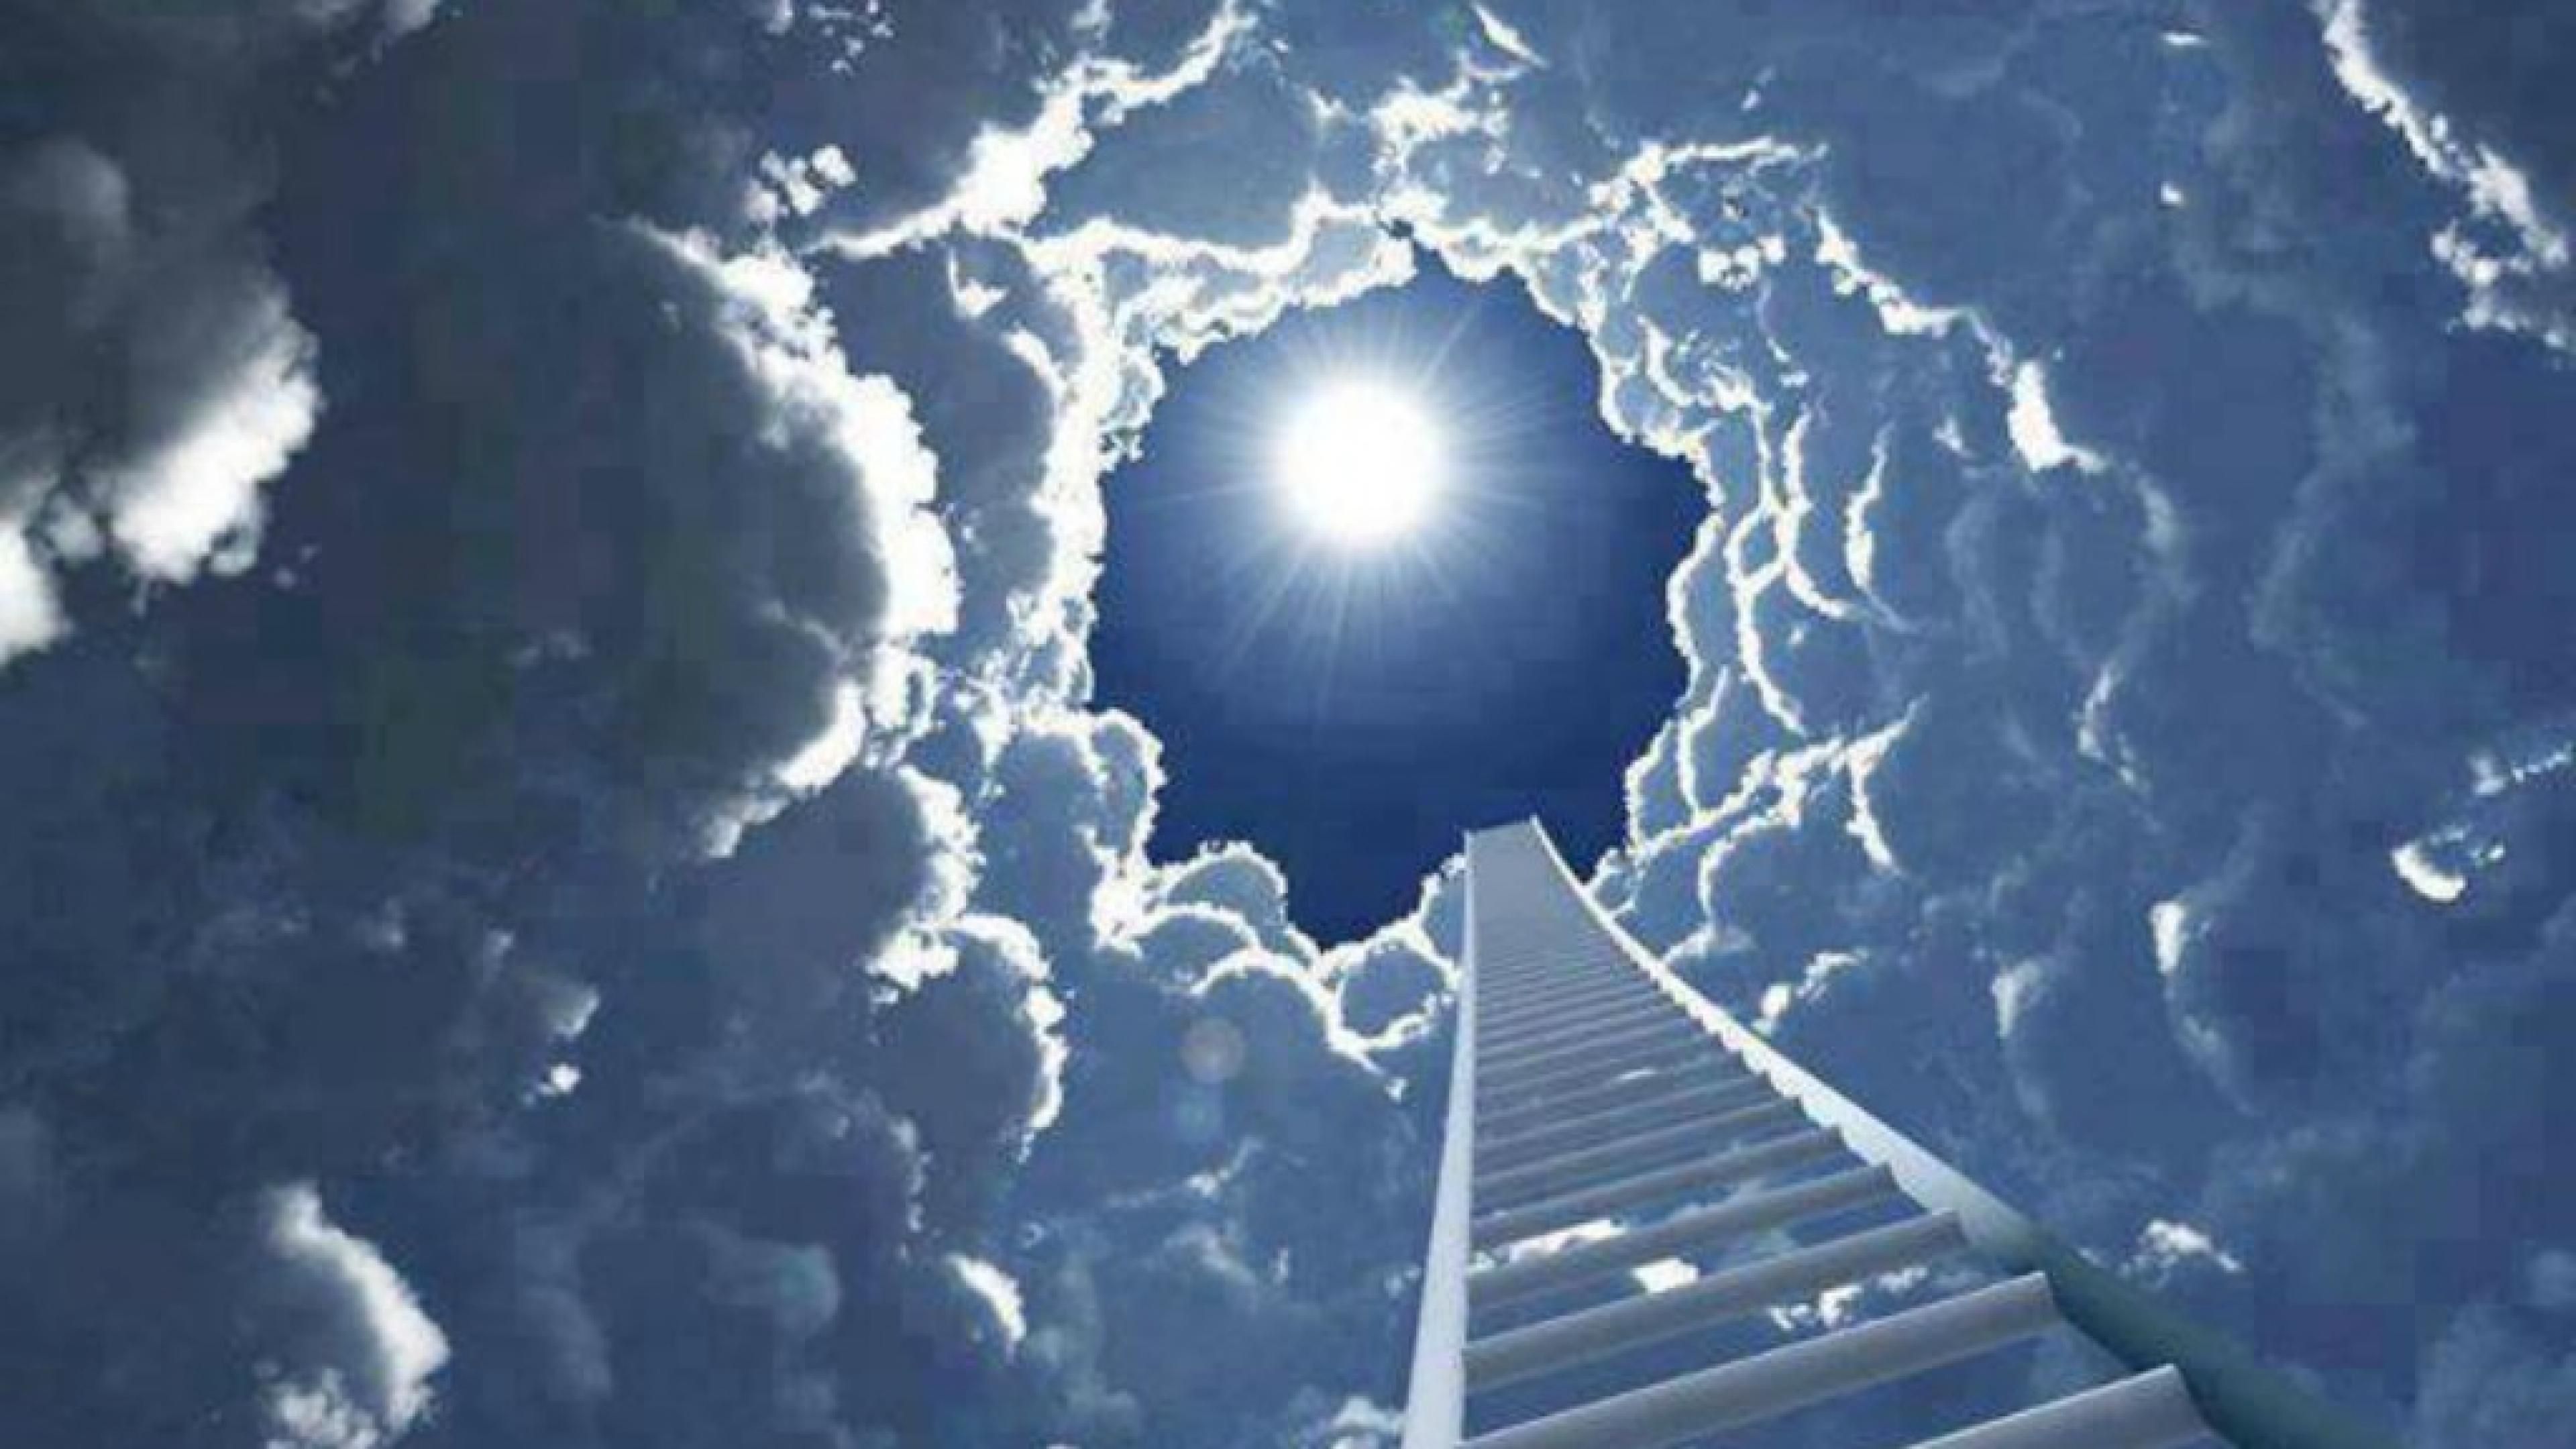 The Stairway To Heaven Photos For Desktop Background Best ...